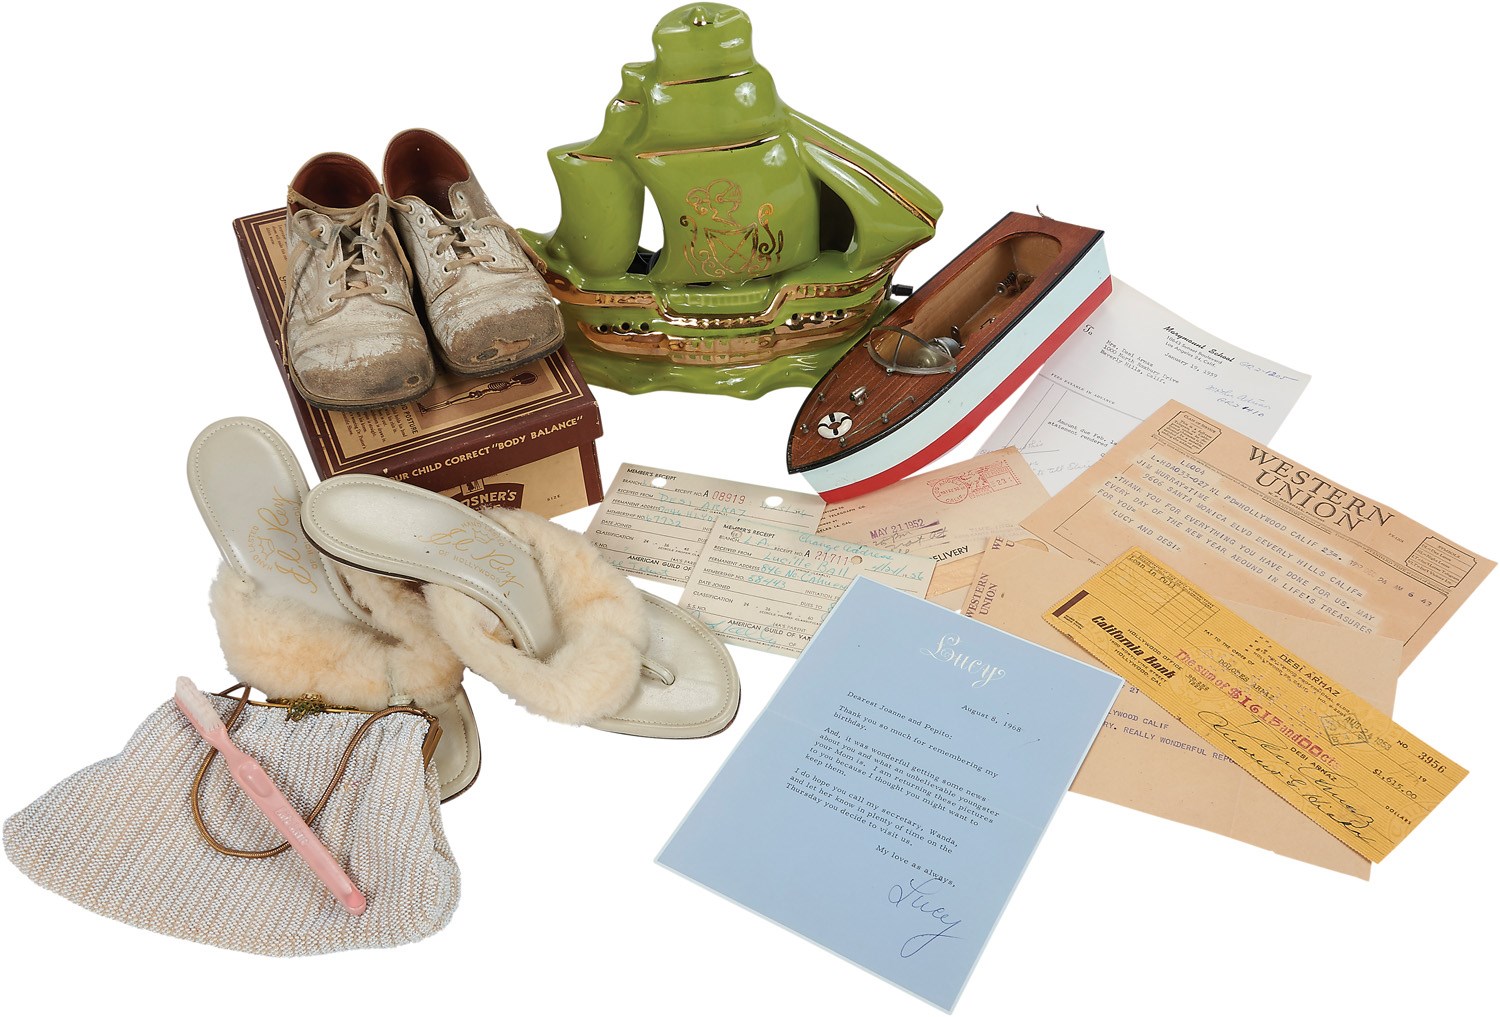 "I Love Lucy" Collection with Lucy's High Heels, Show Props & Autographs (13)